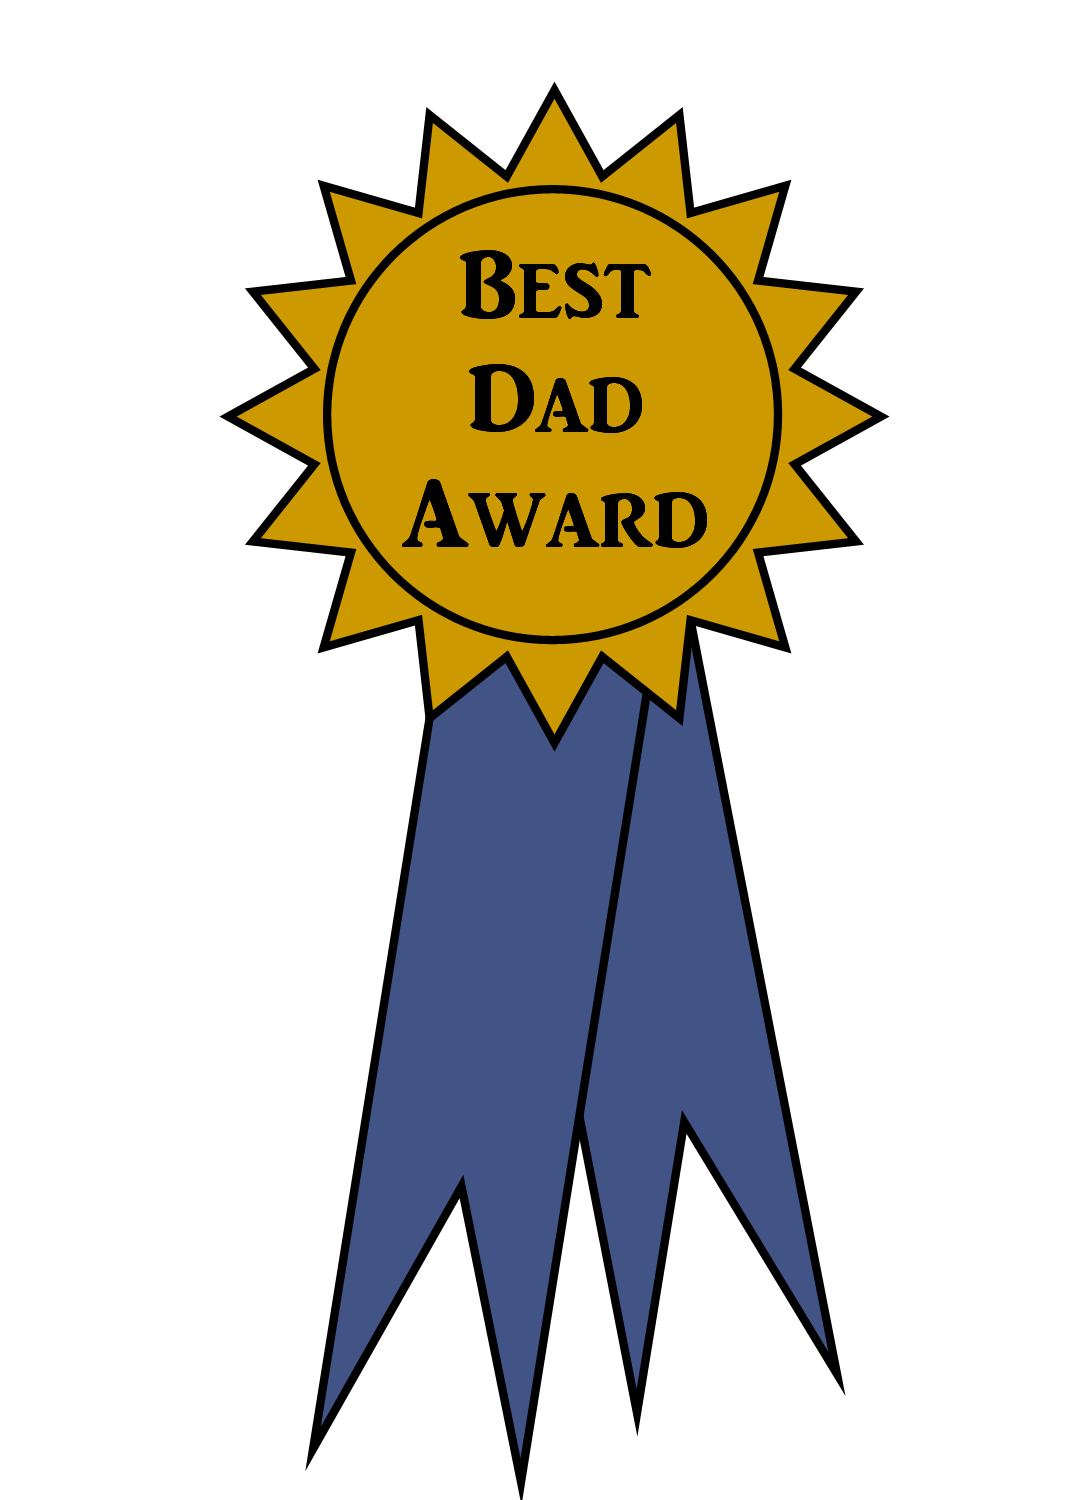 Panda free images to. Father clipart single dad